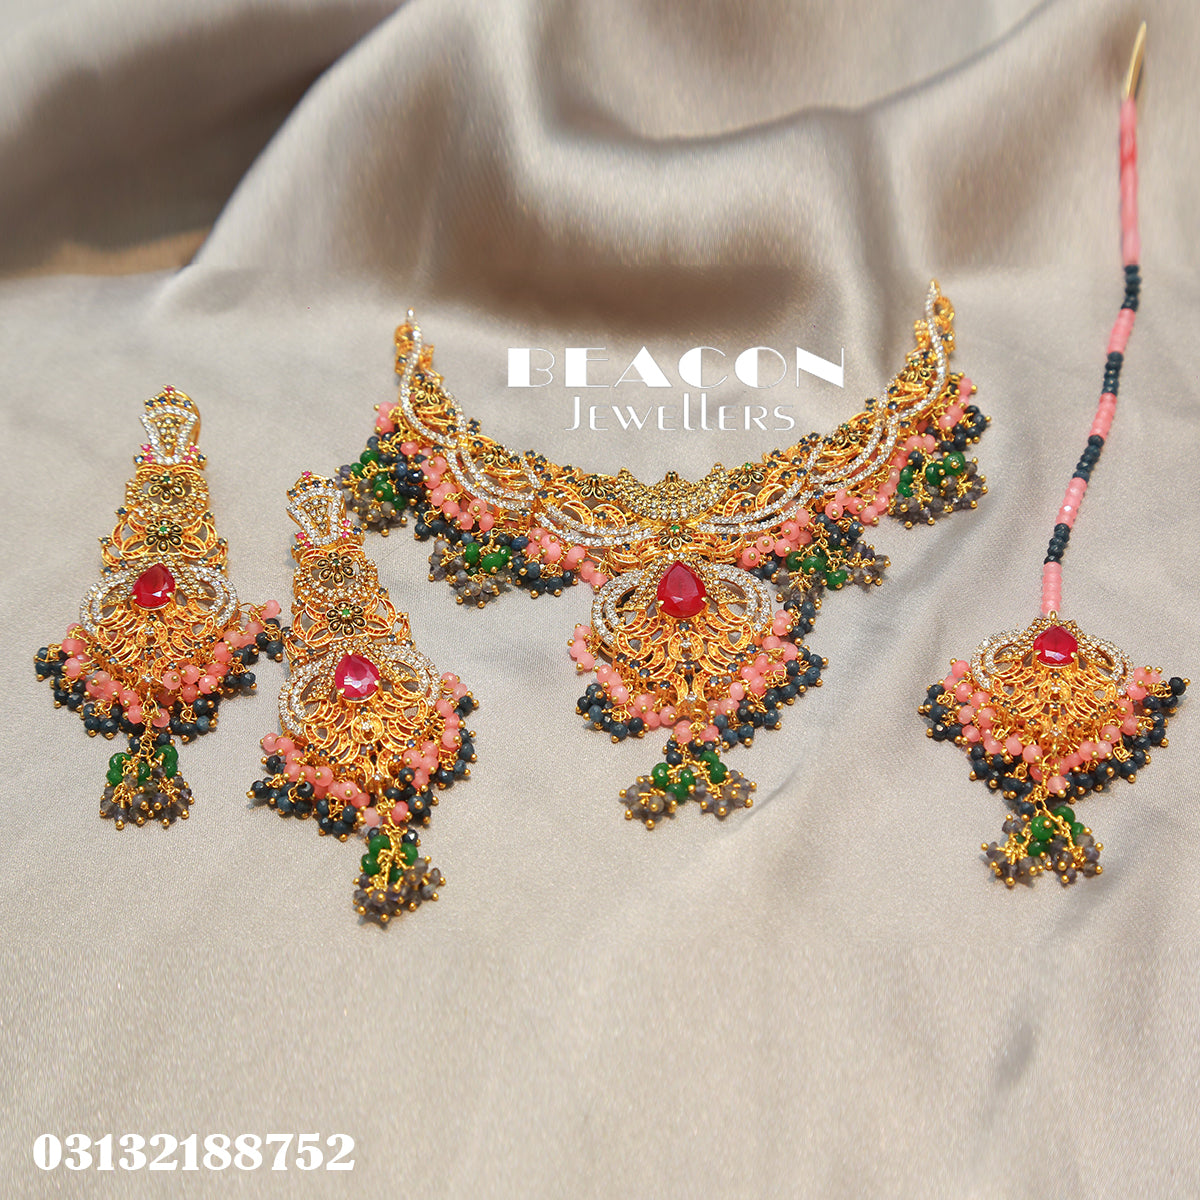 Necklace with Bindi and Earrings 30